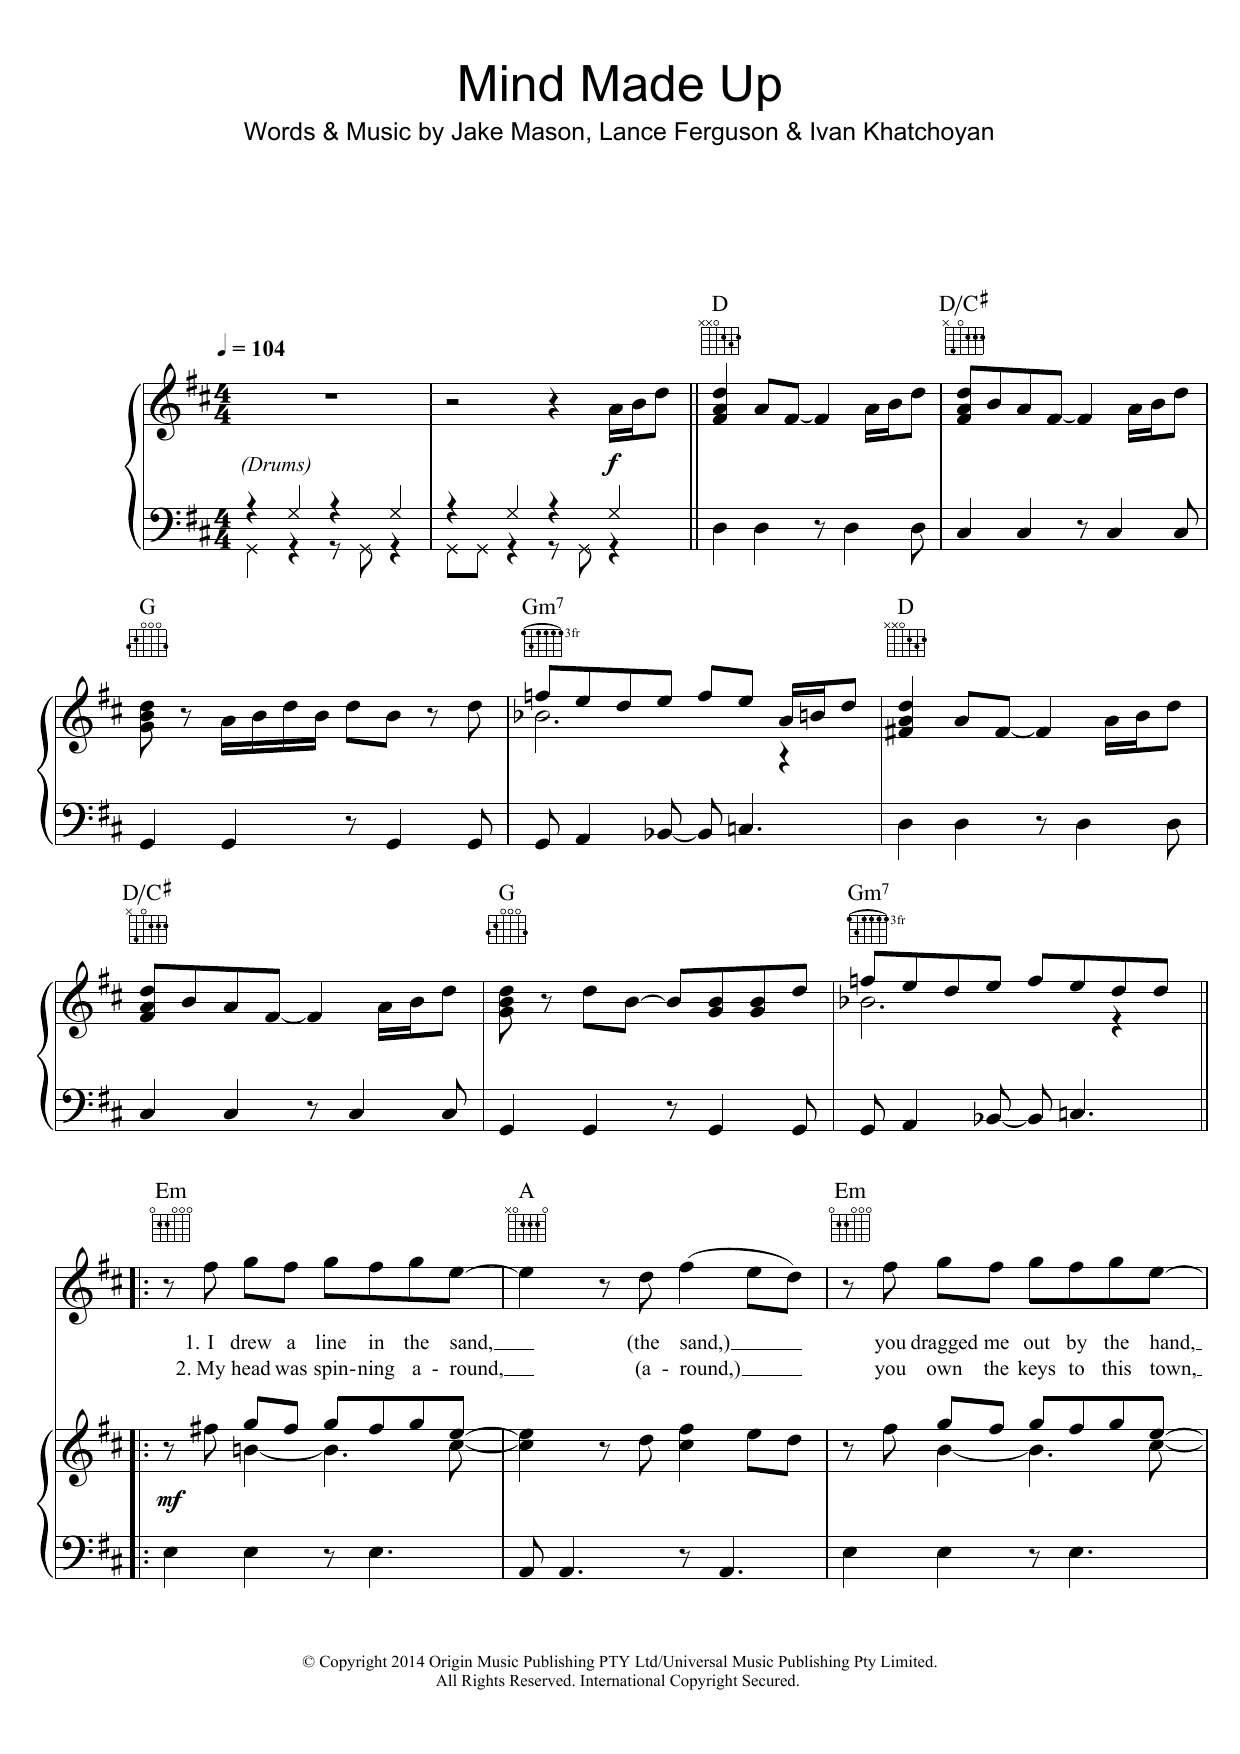 Download Cookin’ on 3 Burners Mind Made Up Sheet Music